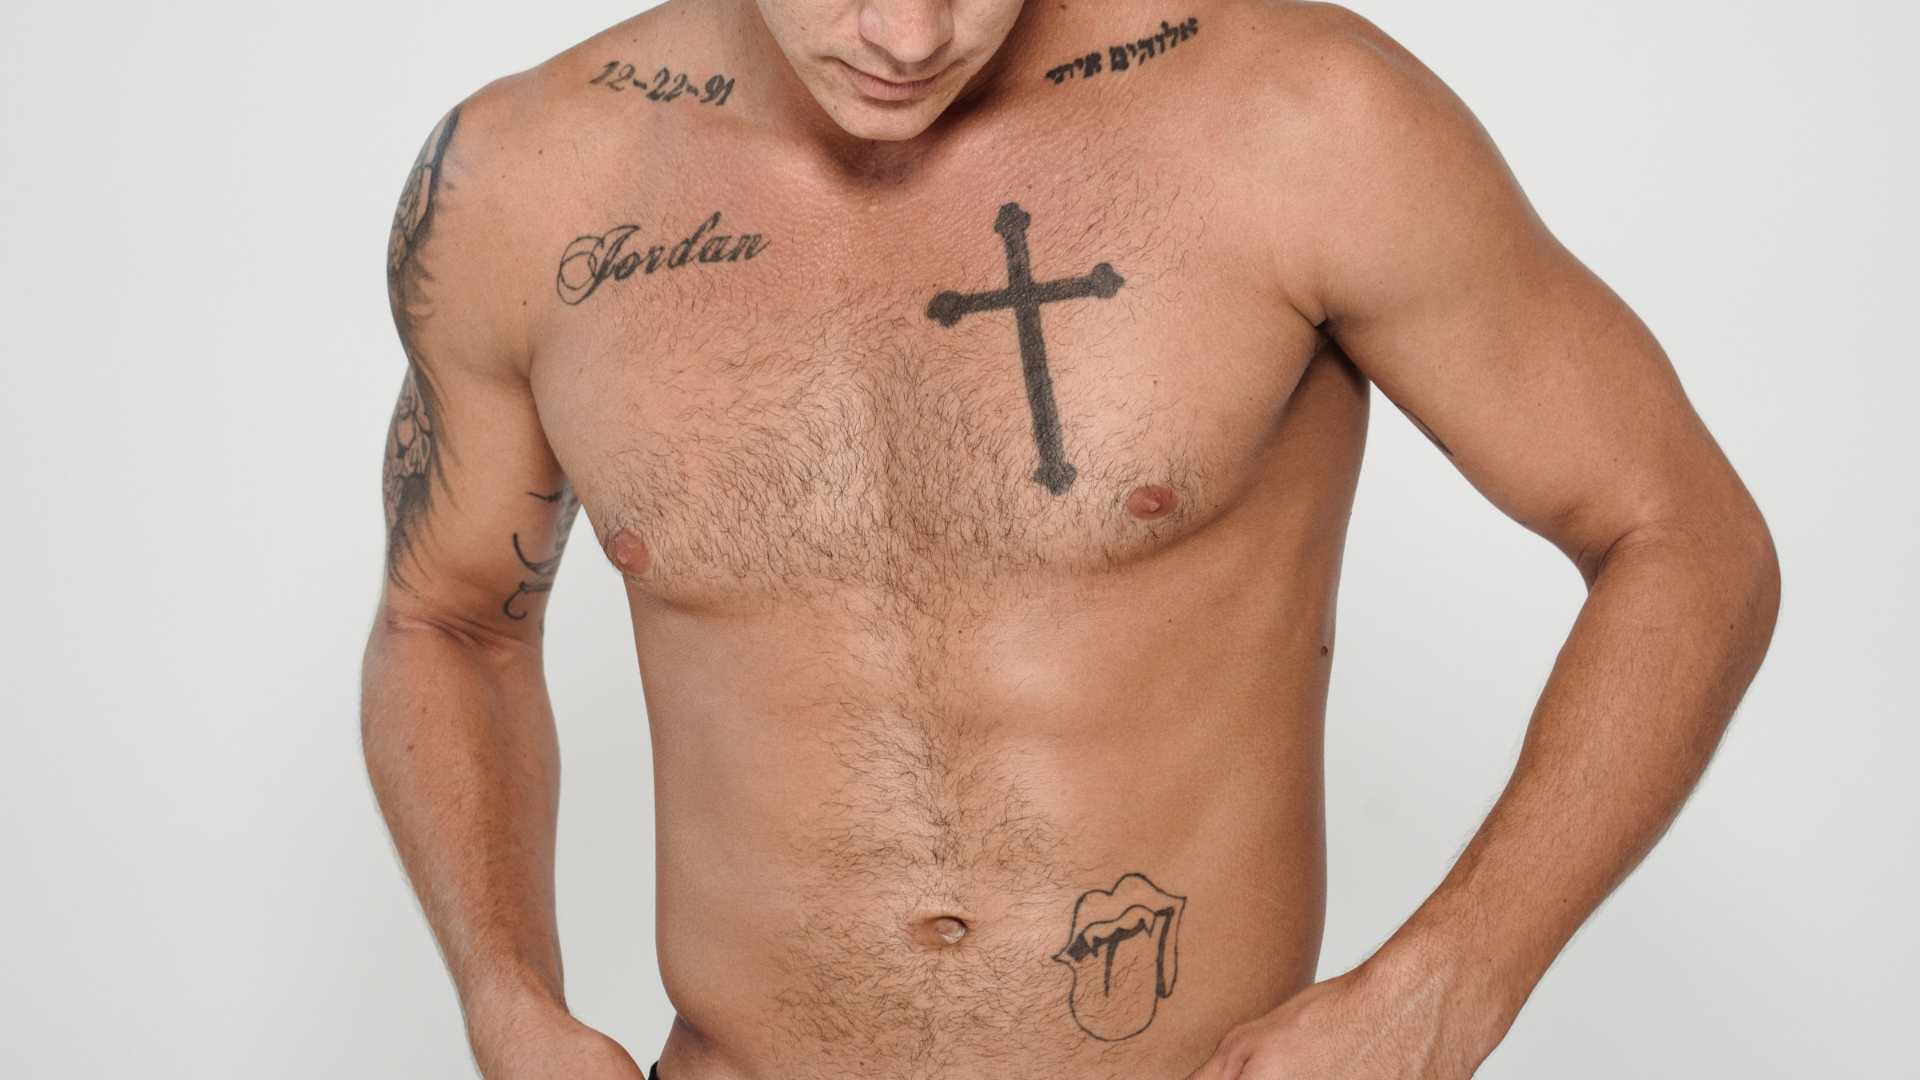 Is Getting a Cross Tattoo with a Bible Verse Biblically Acceptable?